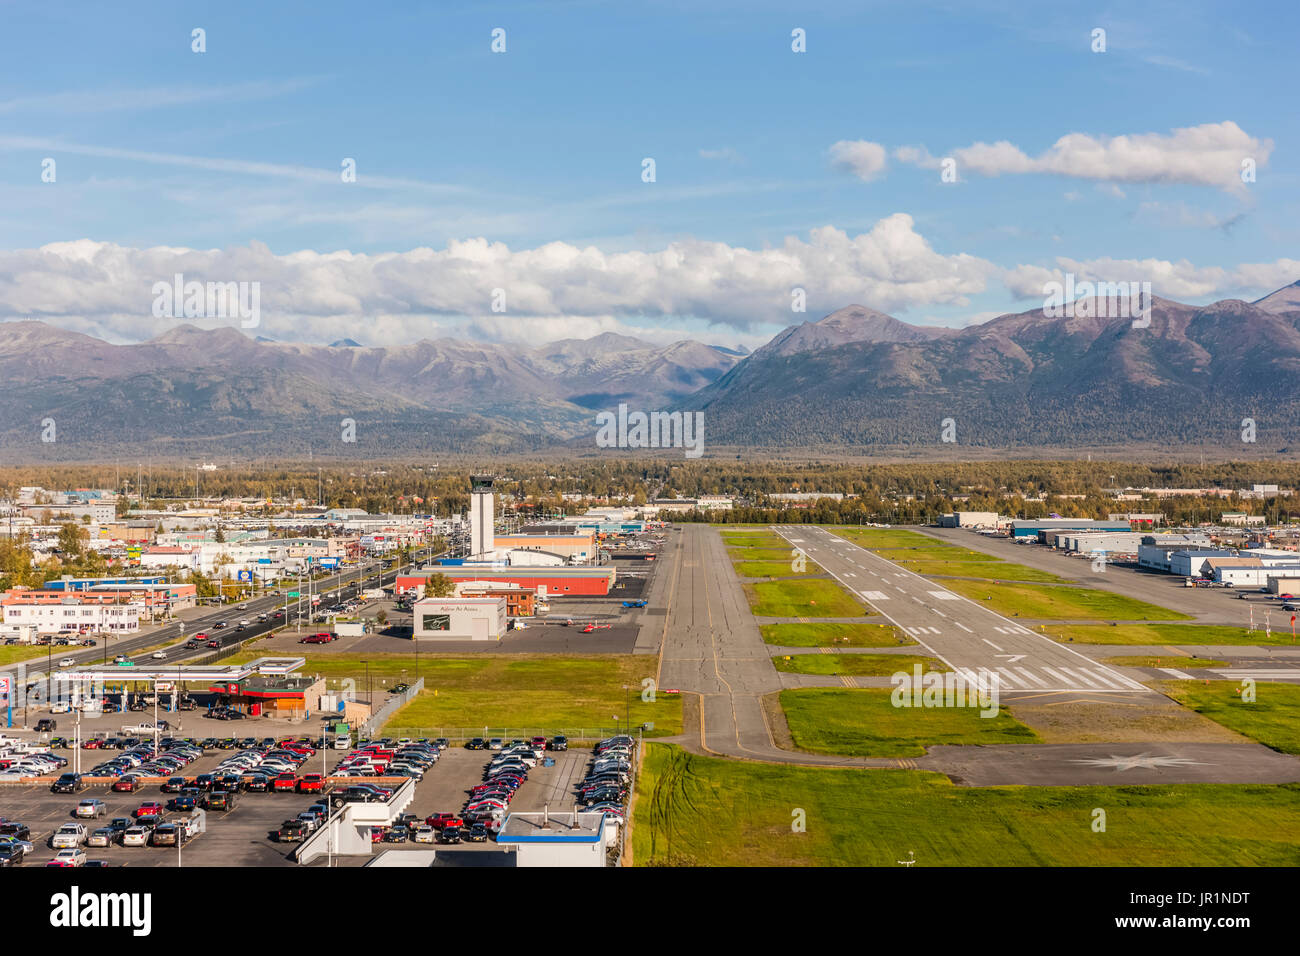 Aerial View Of The Merrill Field Airstrip With The Chugach Mountains In The Background, Southcentral Alaska, USA Stock Photo